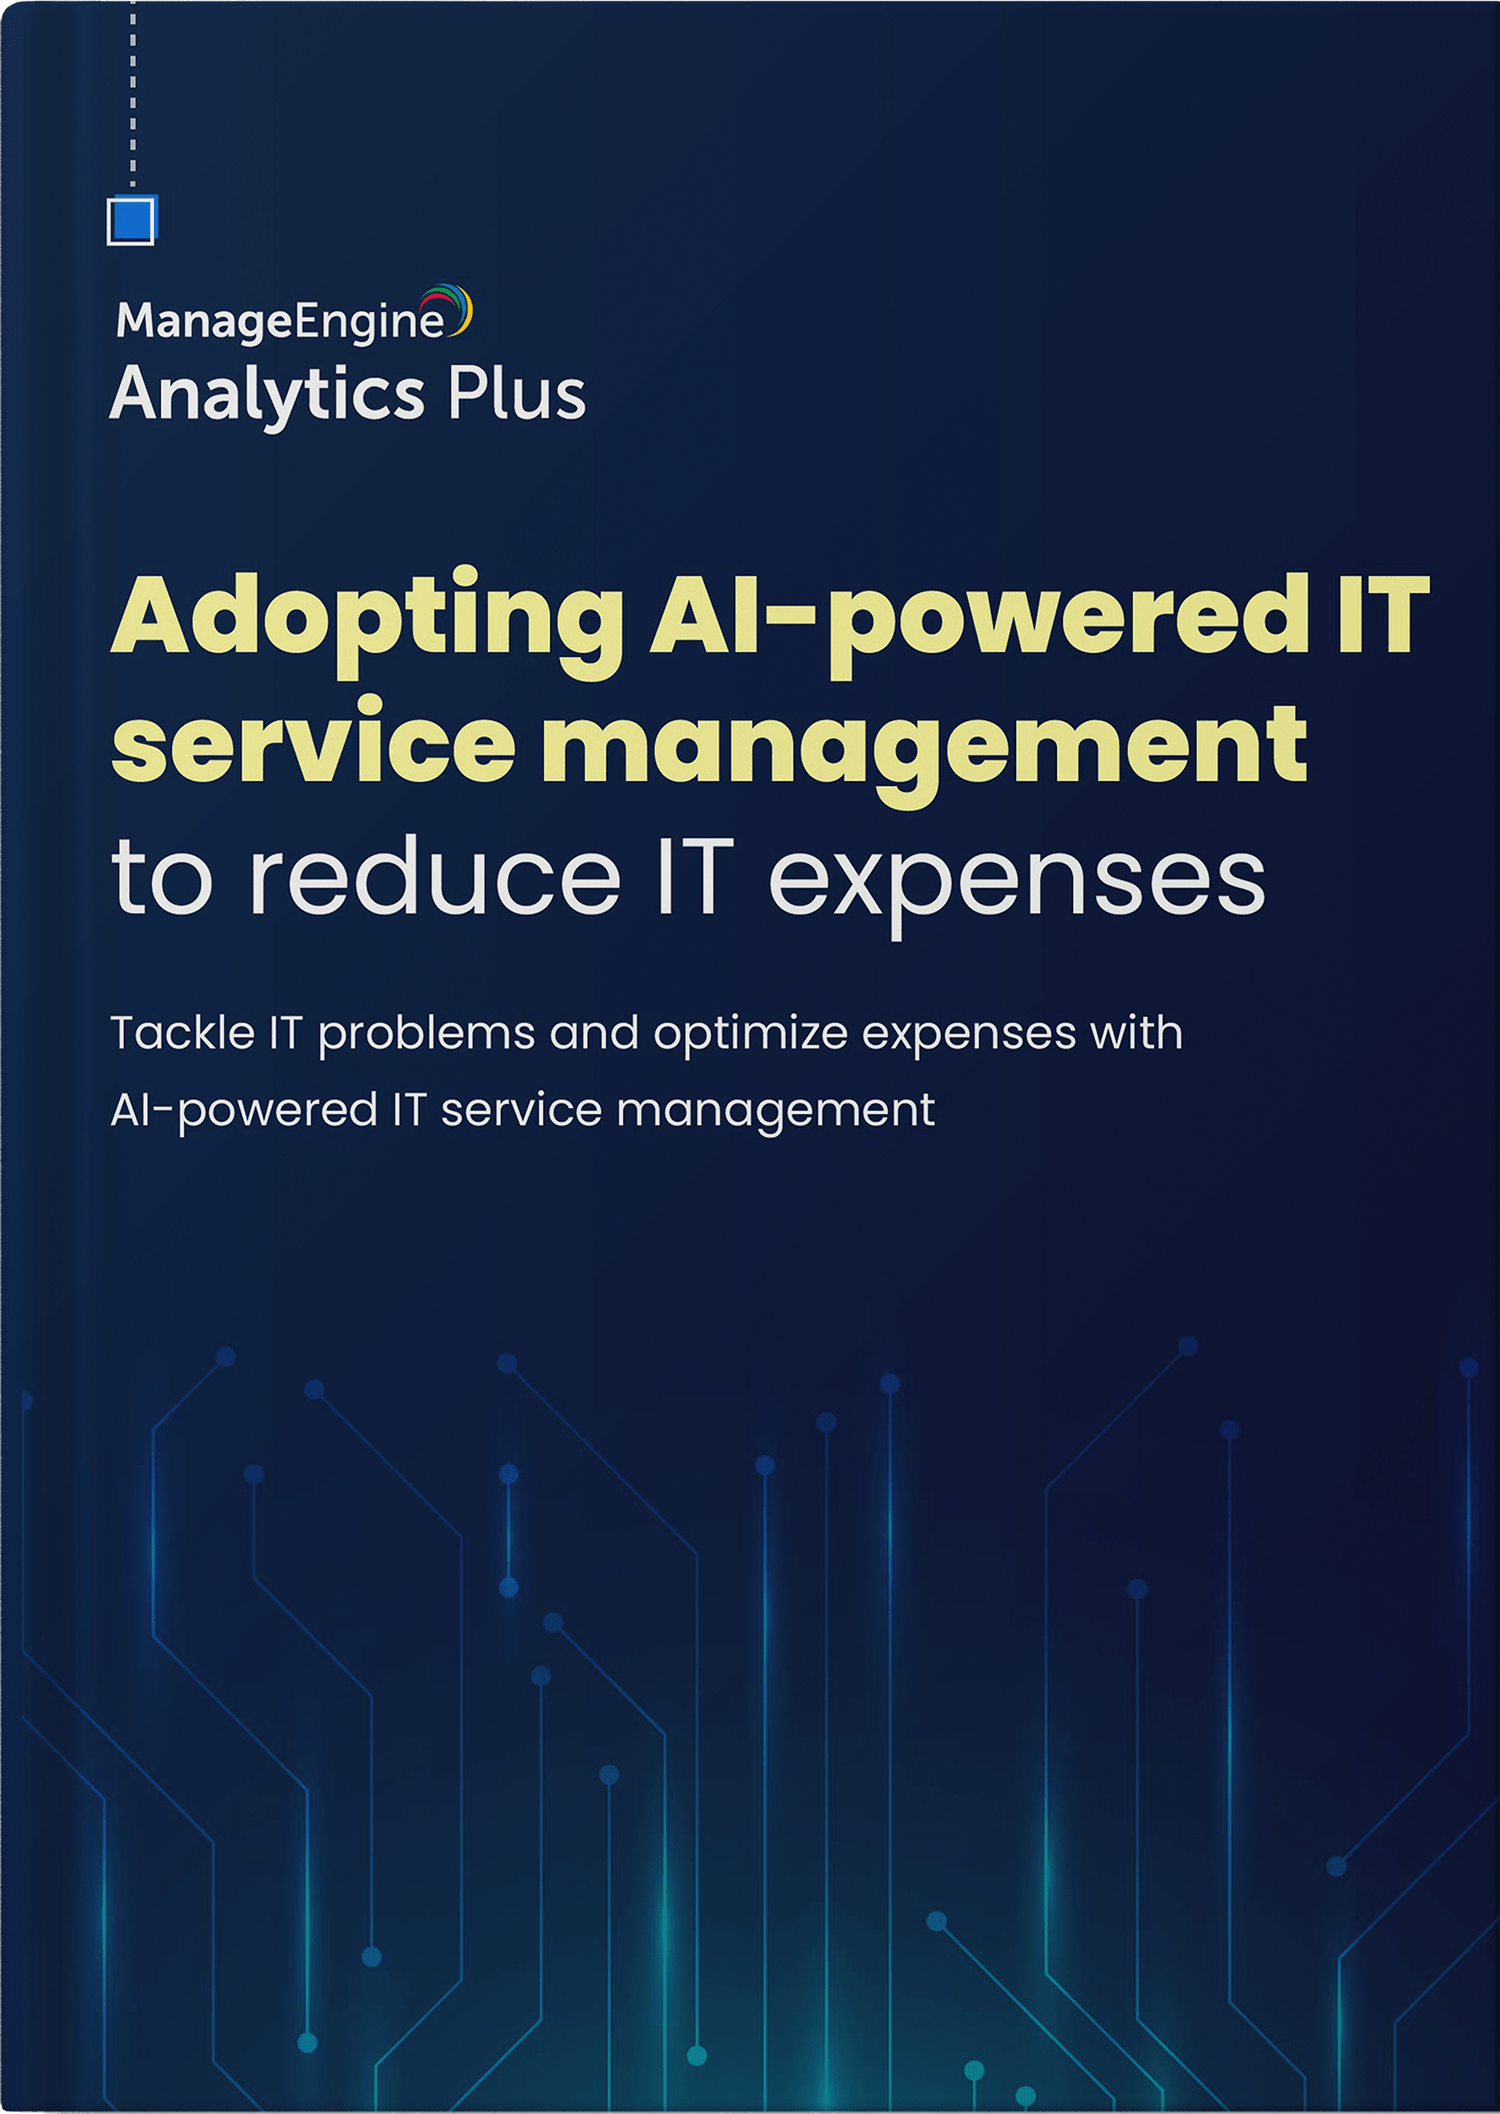 Optimizing IT expenses with AI-powered IT service management